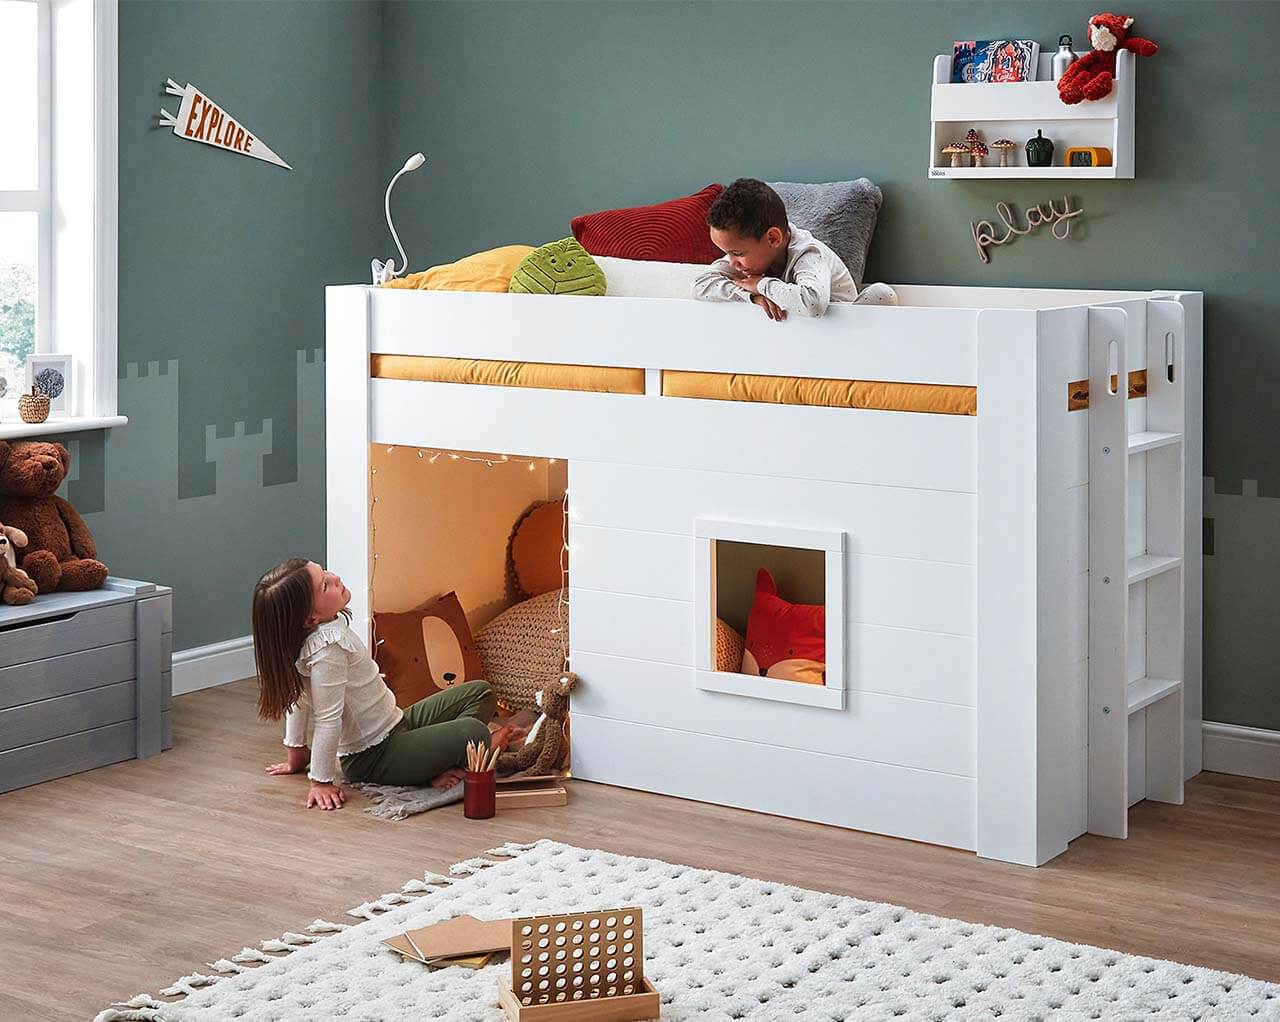 Choosing the right Kids beds